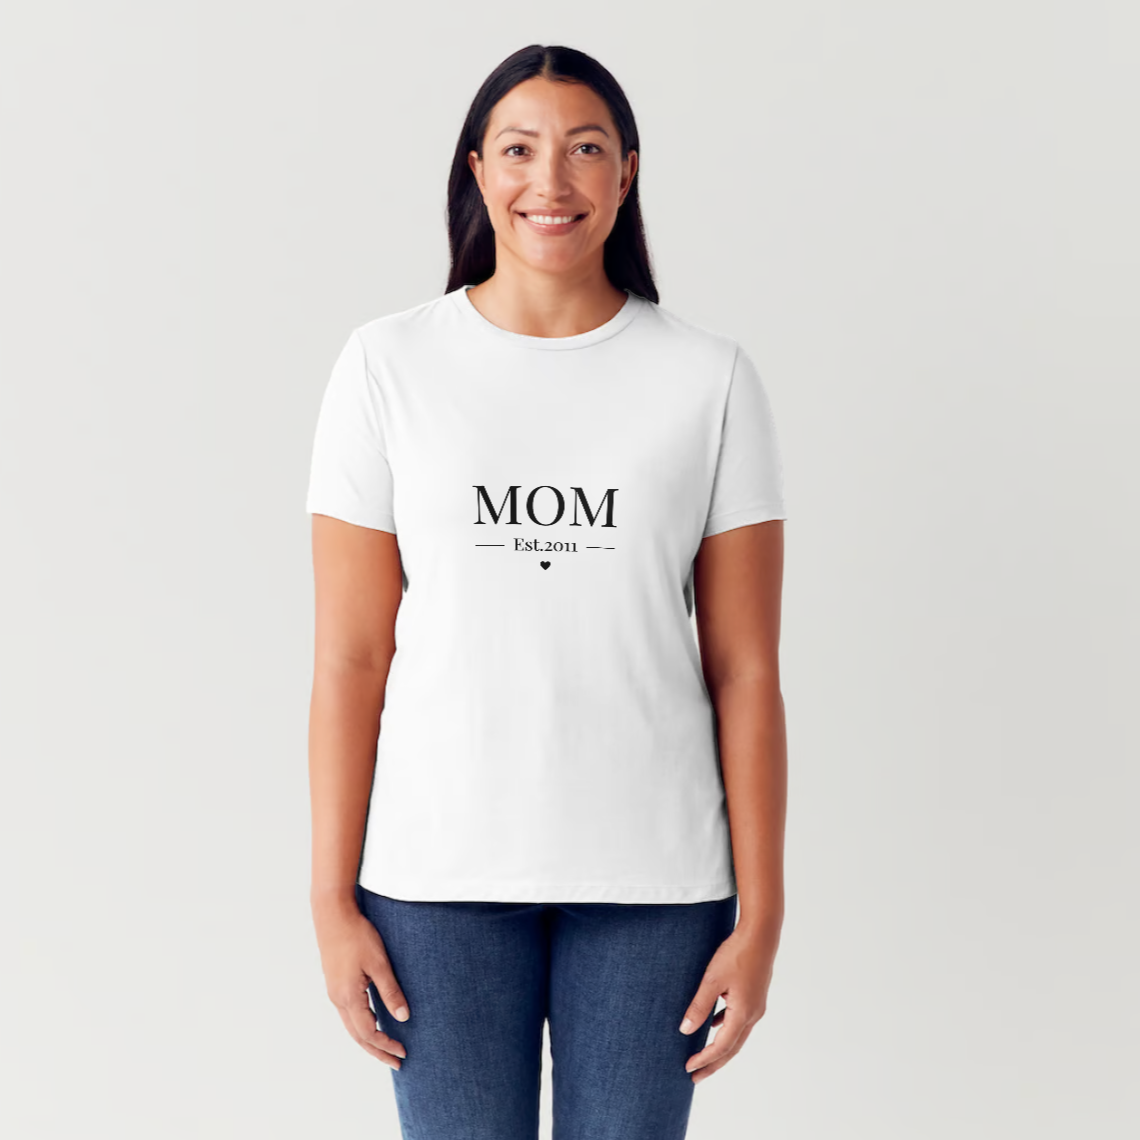 MOM est 2011 T-Shirt - Personalized Mother's Day or Christmas Gift 